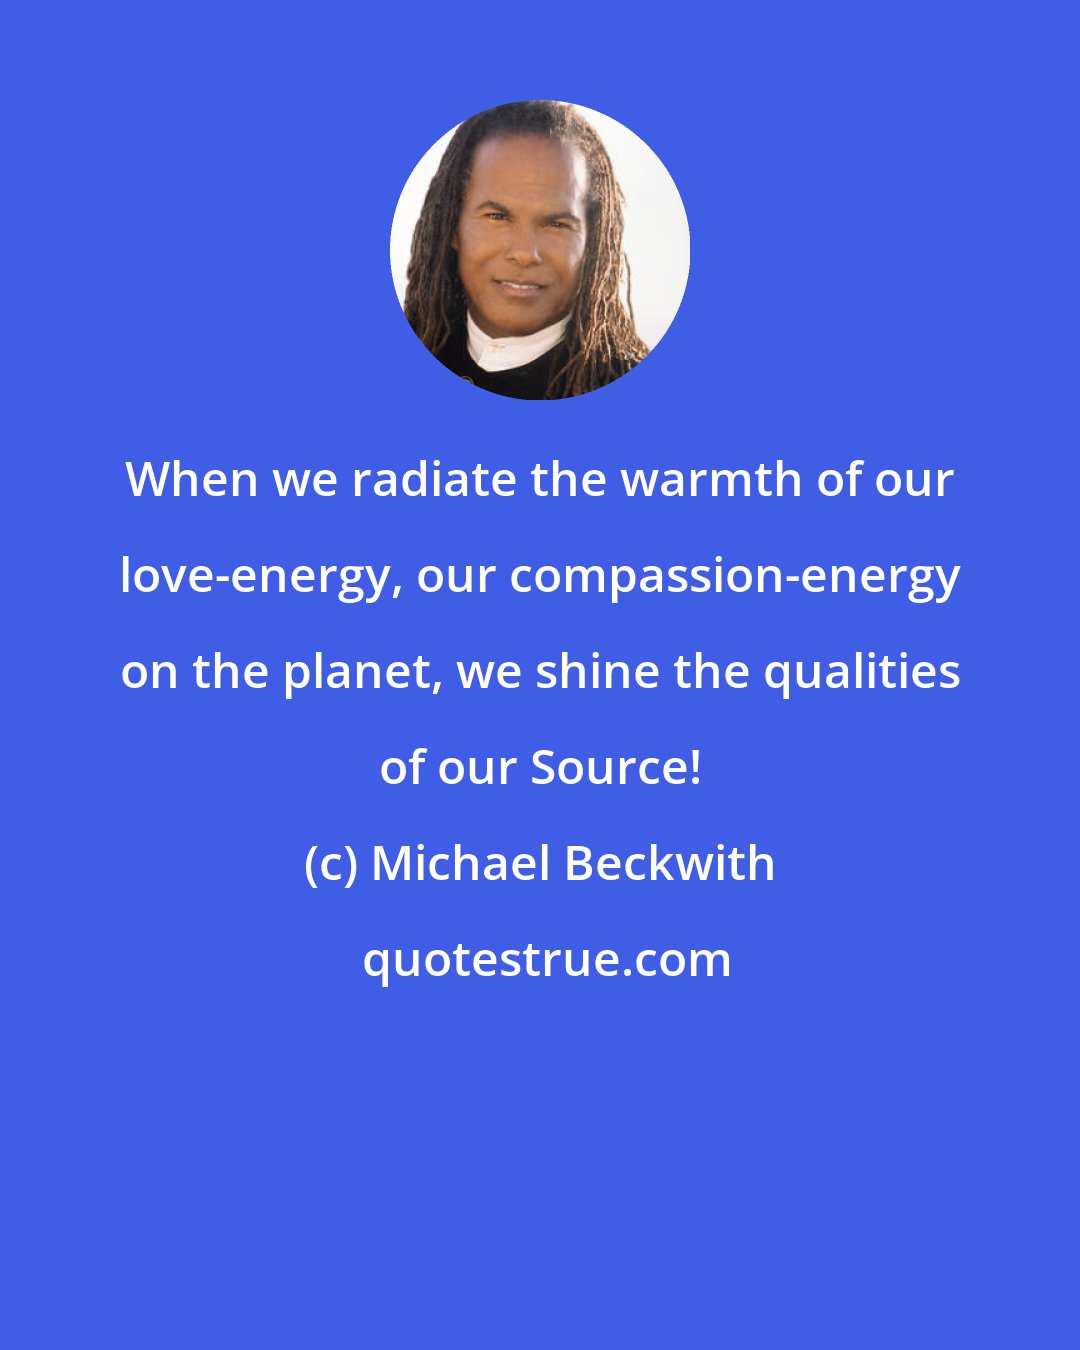 Michael Beckwith: When we radiate the warmth of our love-energy, our compassion-energy on the planet, we shine the qualities of our Source!